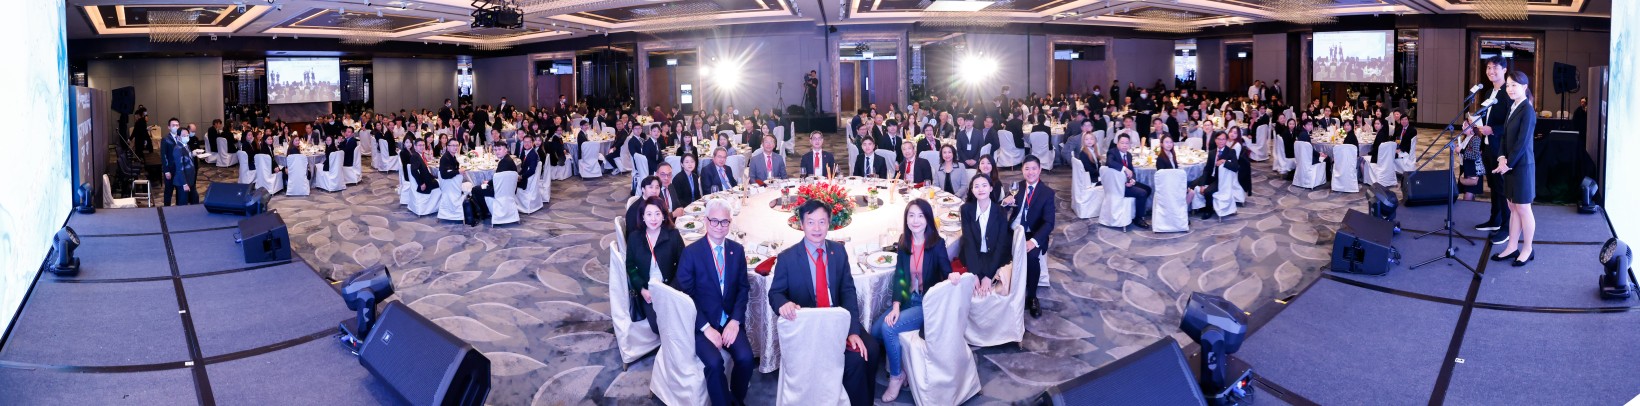 Lingnan University holds the Lingnan Networking Evening to forge connection between top-performing students and community leaders, and explore collaboration opportunities for both parties.